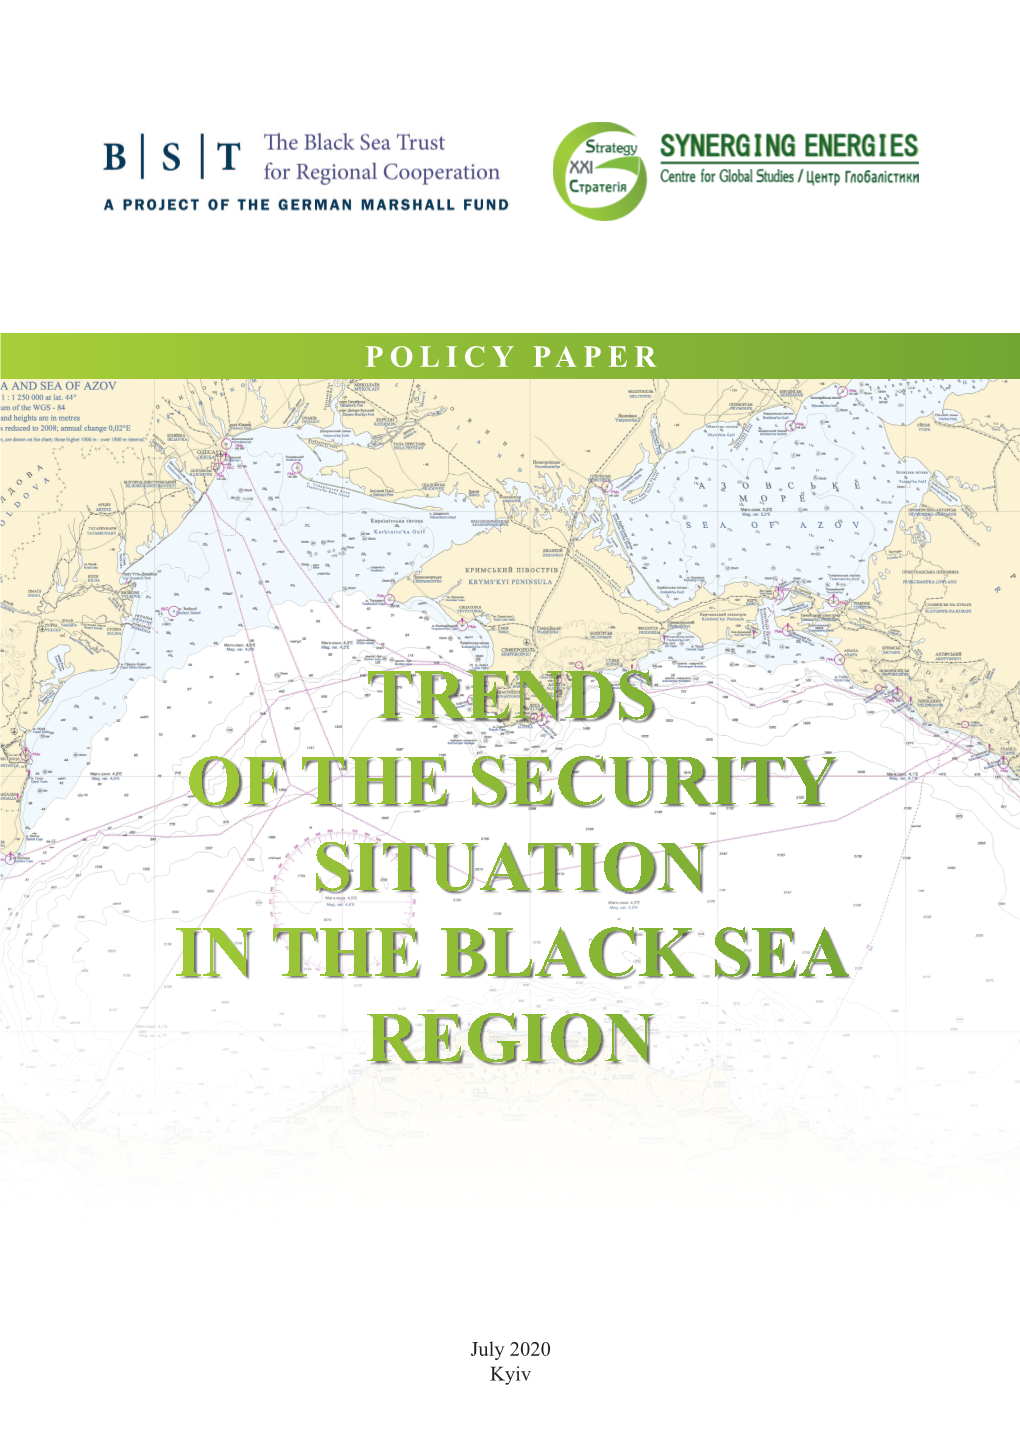 Trends of the Security Situation in the Black Sea Region